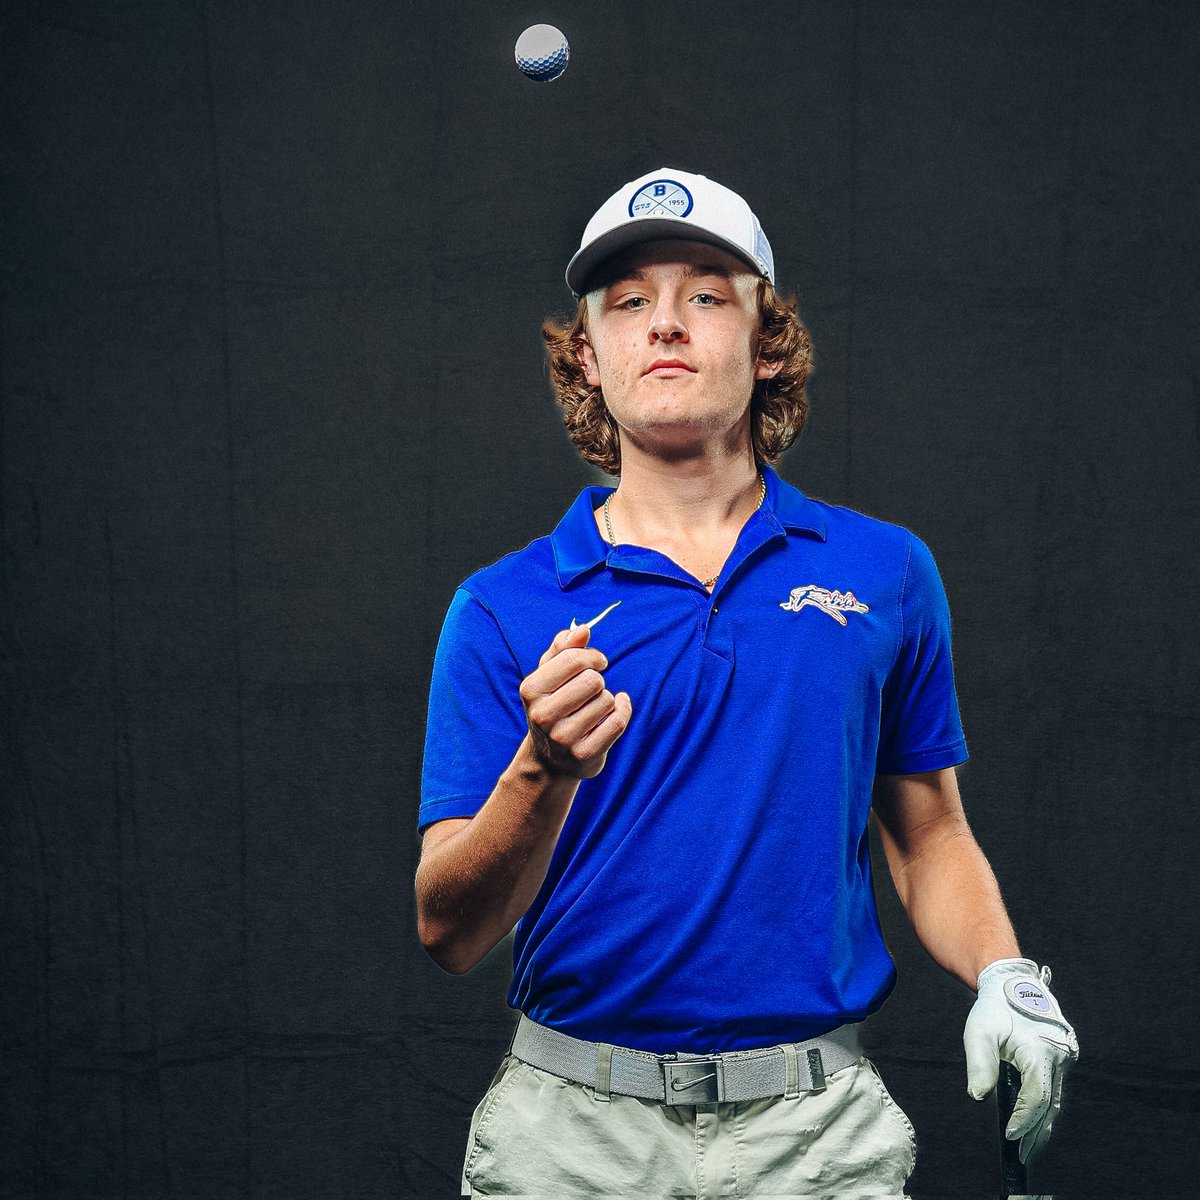 @Trad_Gillespie is at the Upper-State Championship at Cobbs Glenn today. He is -1 with three holes to play. @JFBHSRebels @SpartanburgD5 @ByrnesRebelGolf @bhsrunninrebels @fredcoanjr @btrout14